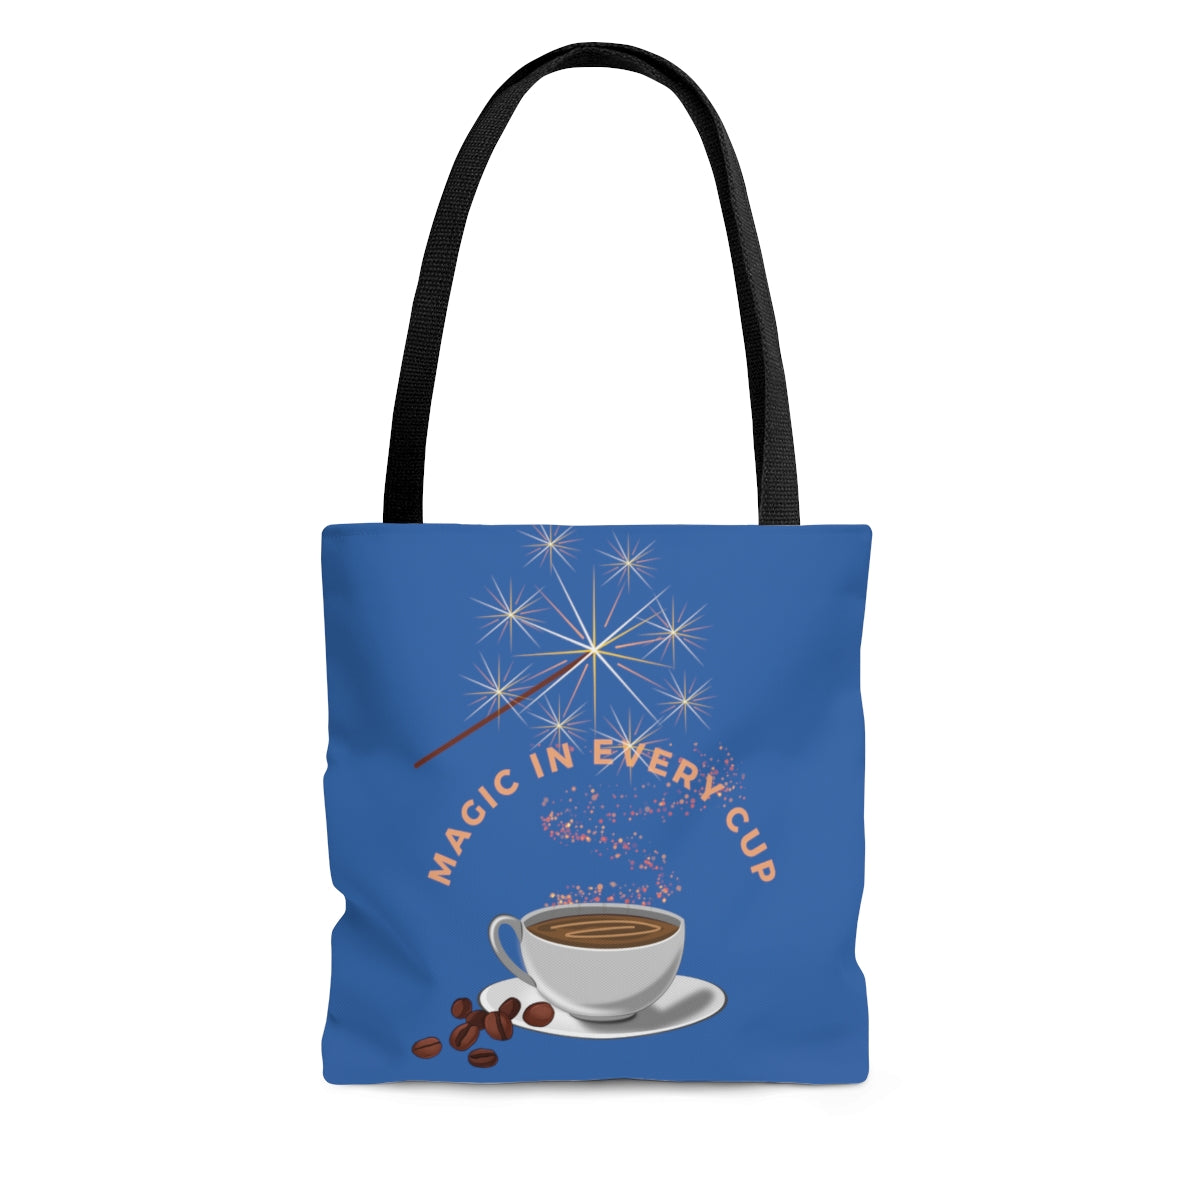 There's Magic in Every Cup Tote Bag